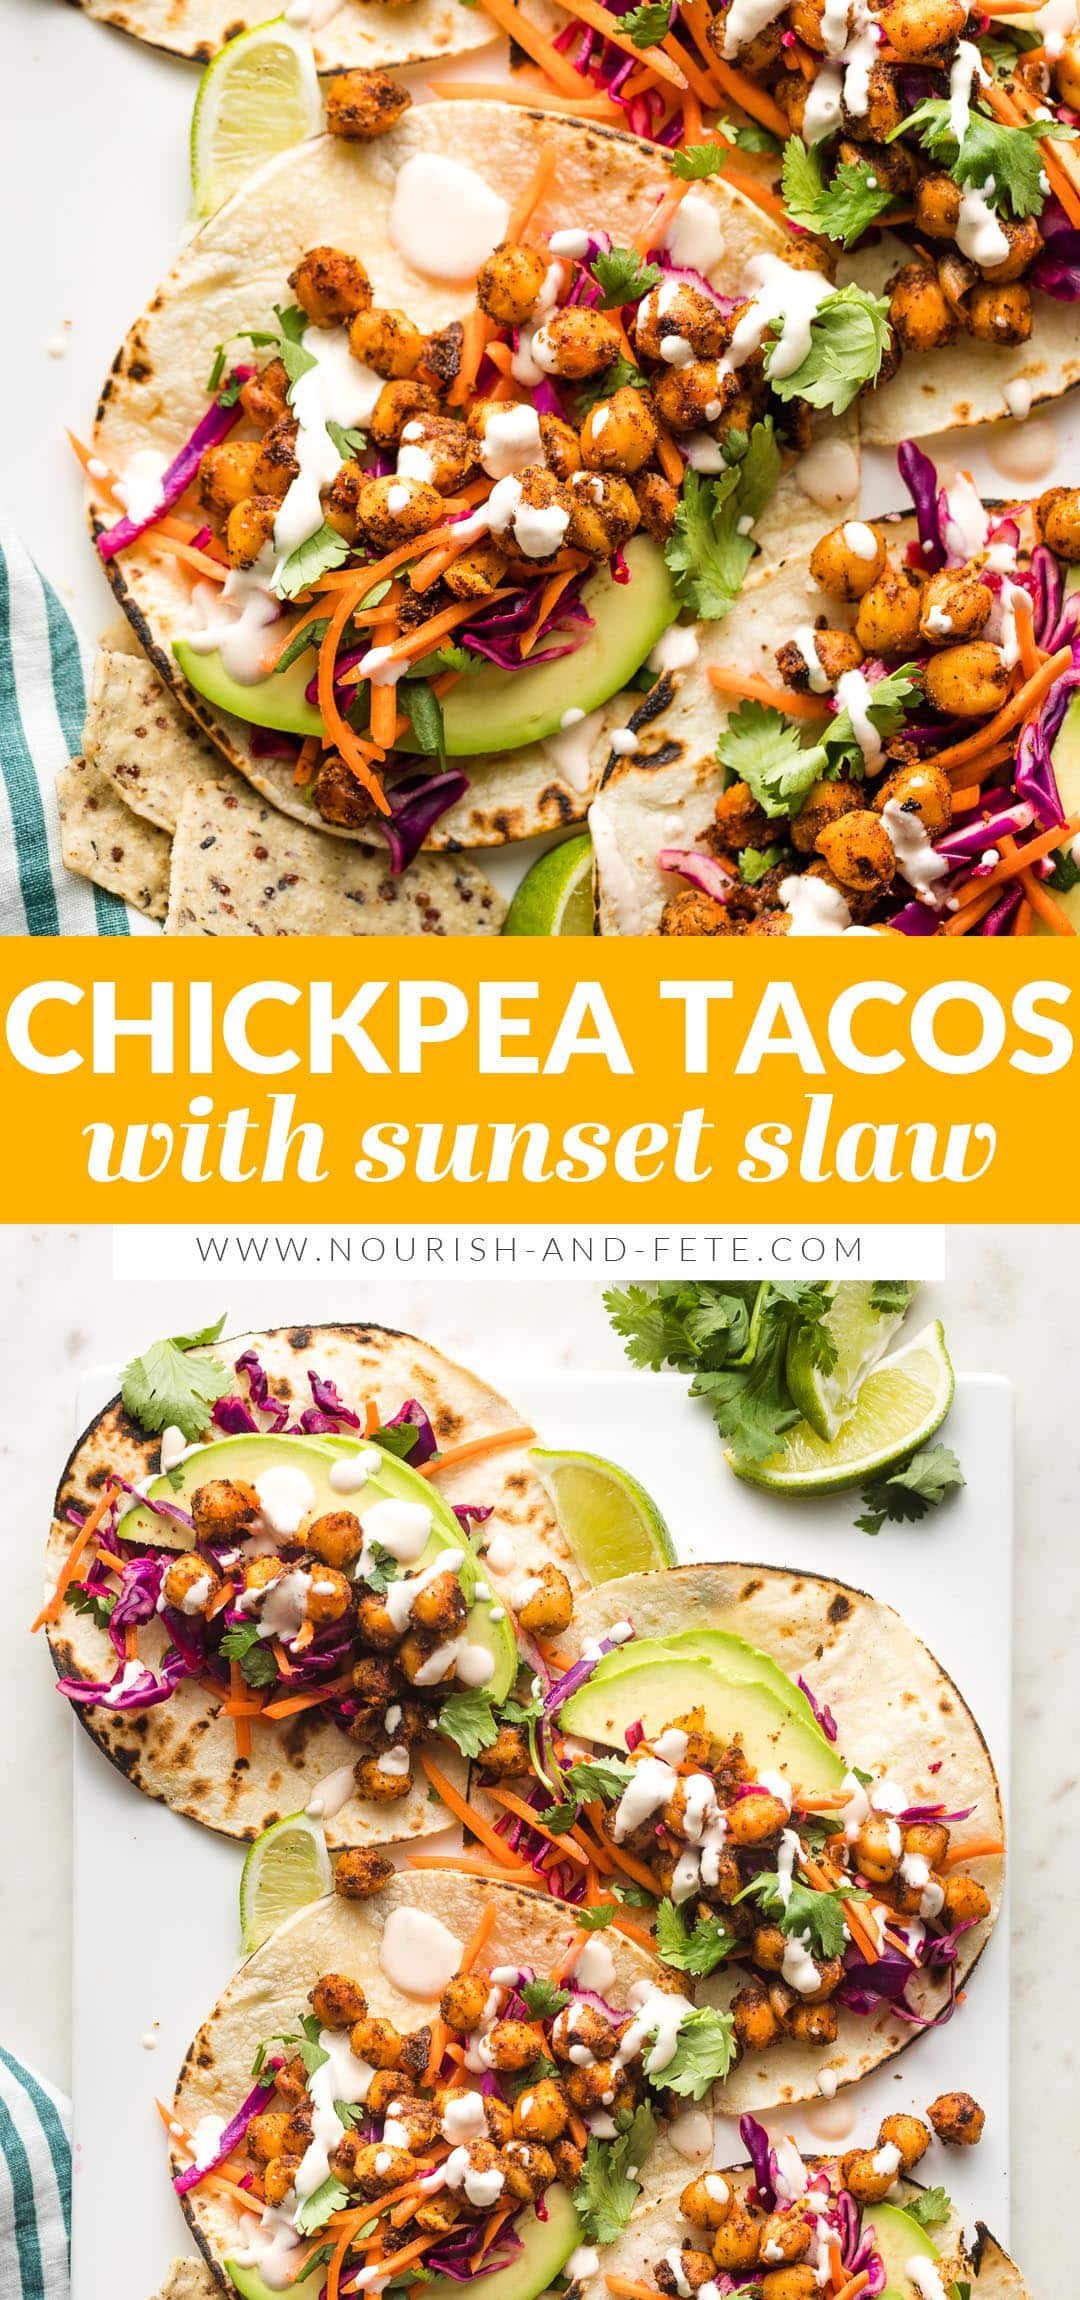 Crispy Chickpea Tacos with Sunset Slaw - Nourish and Fete